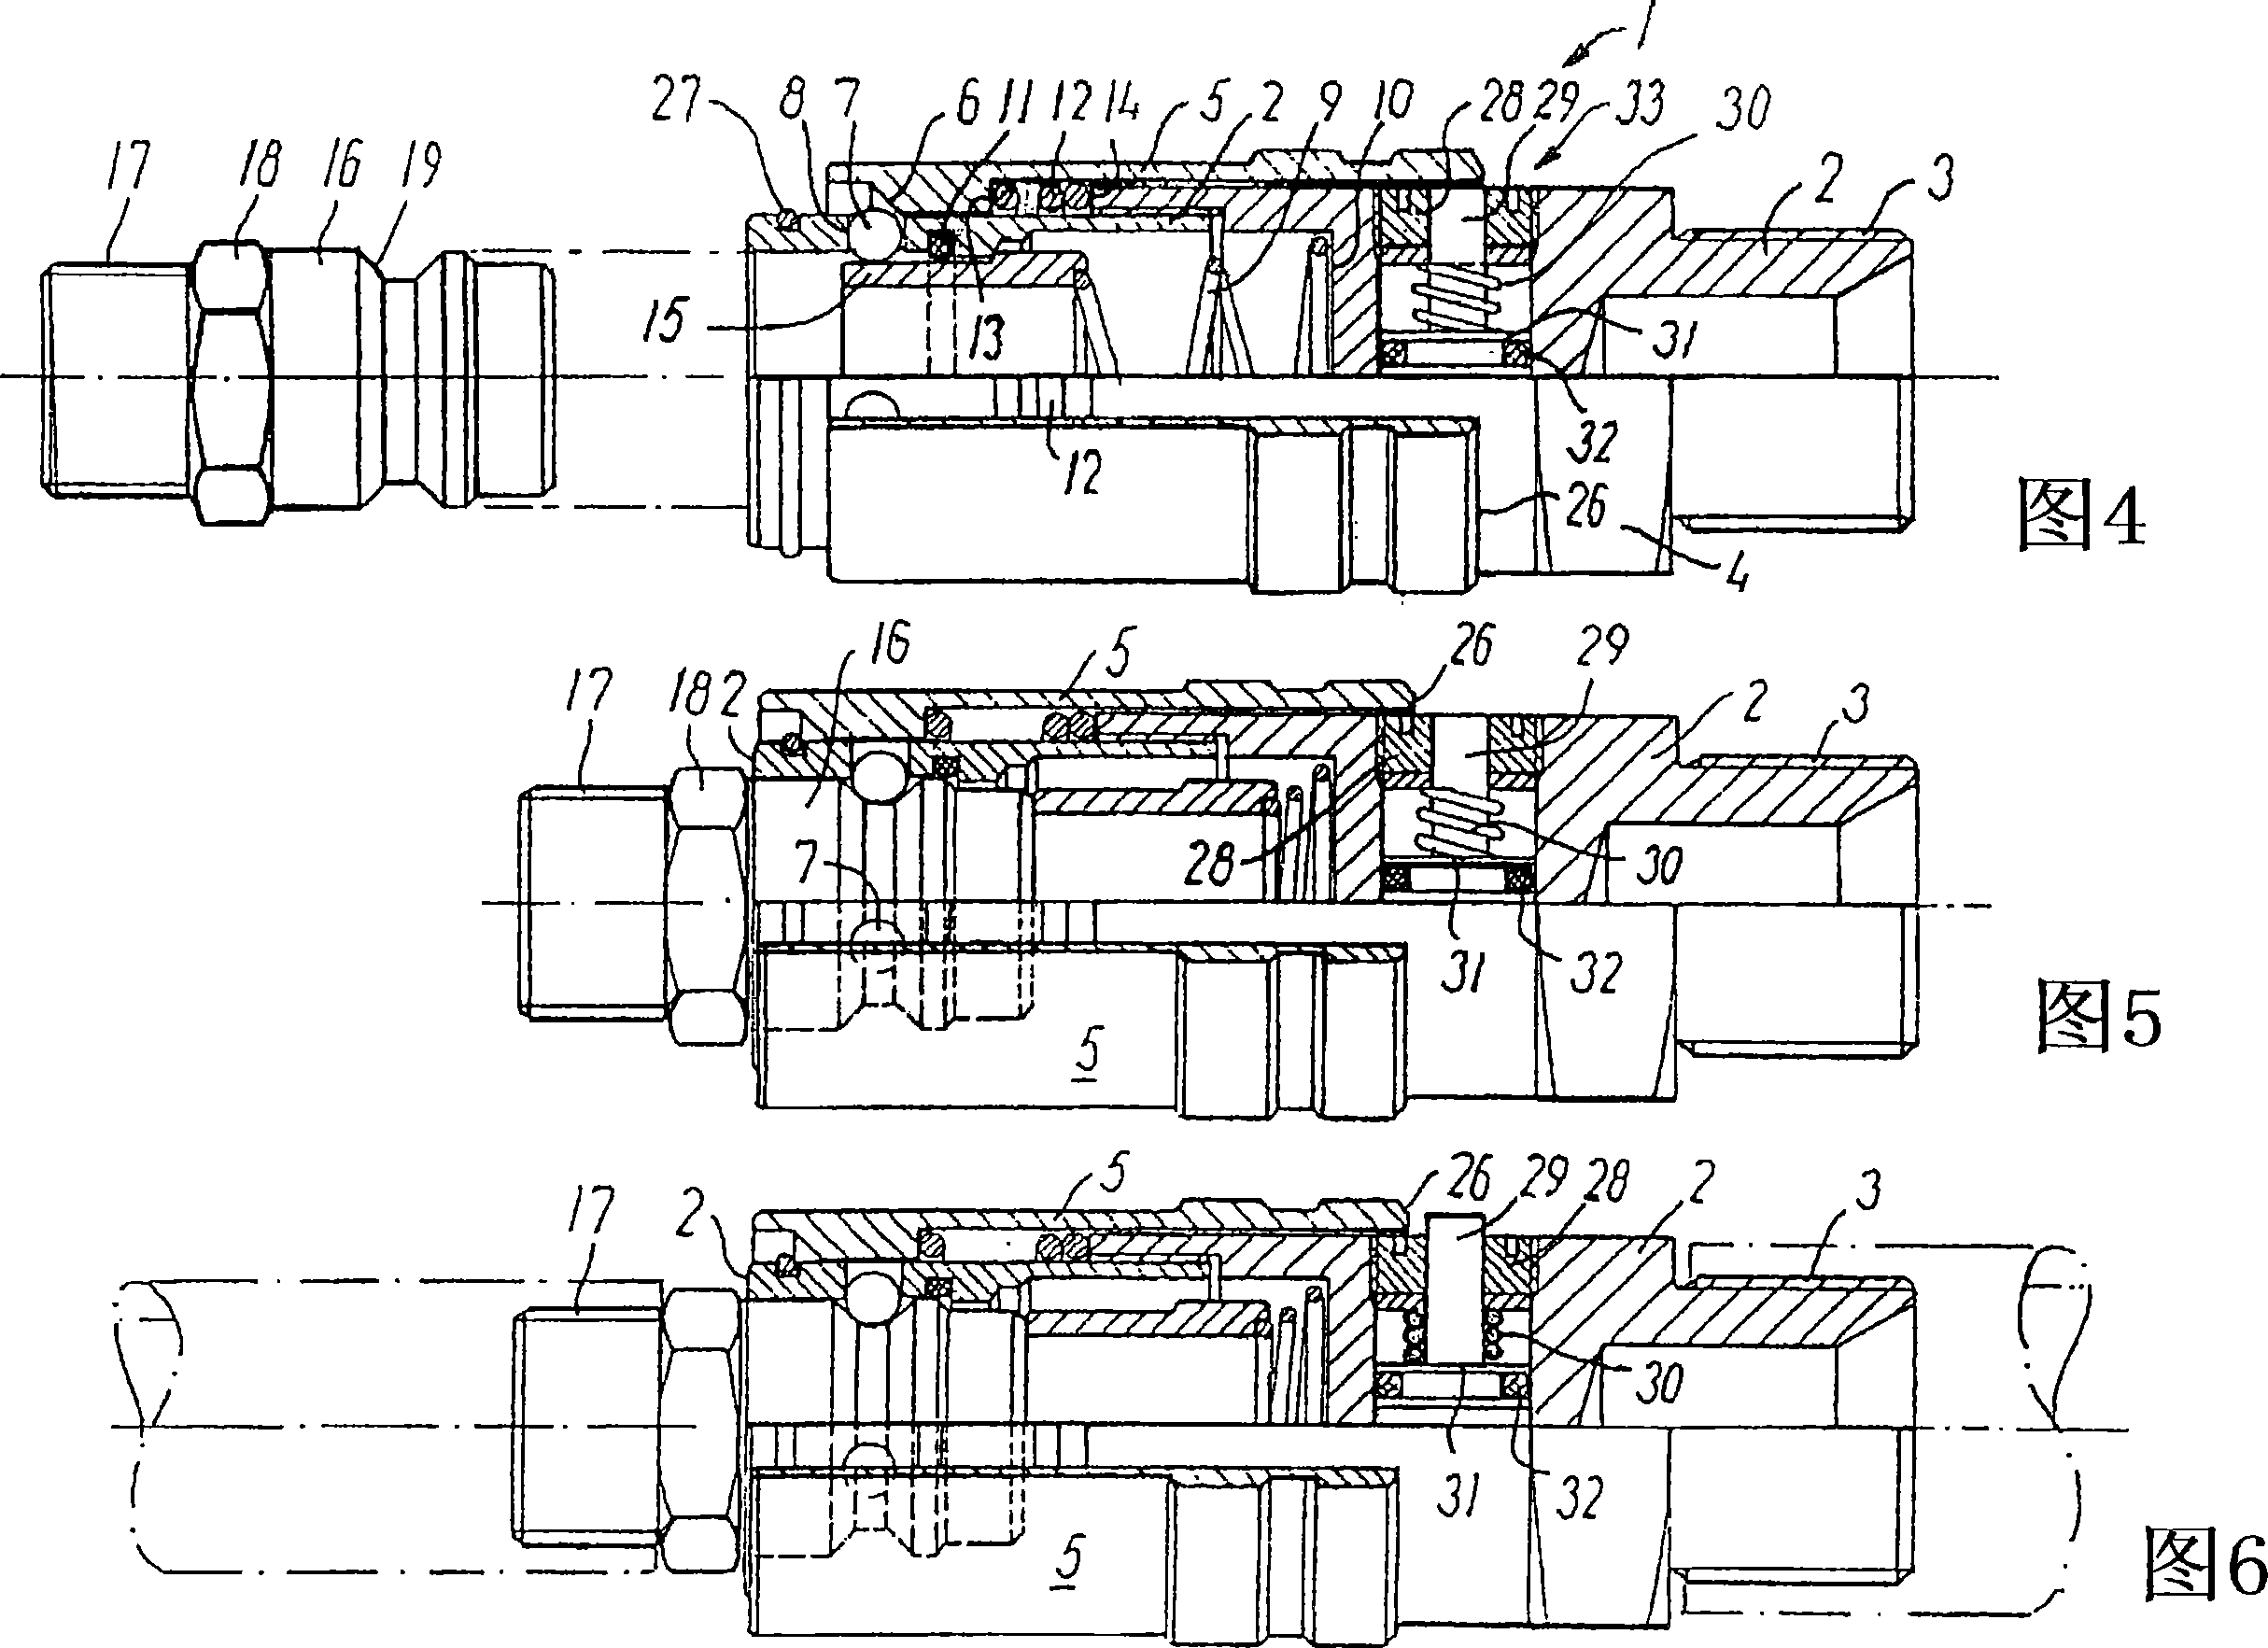 A coupler for the transfer of fluids under pressure